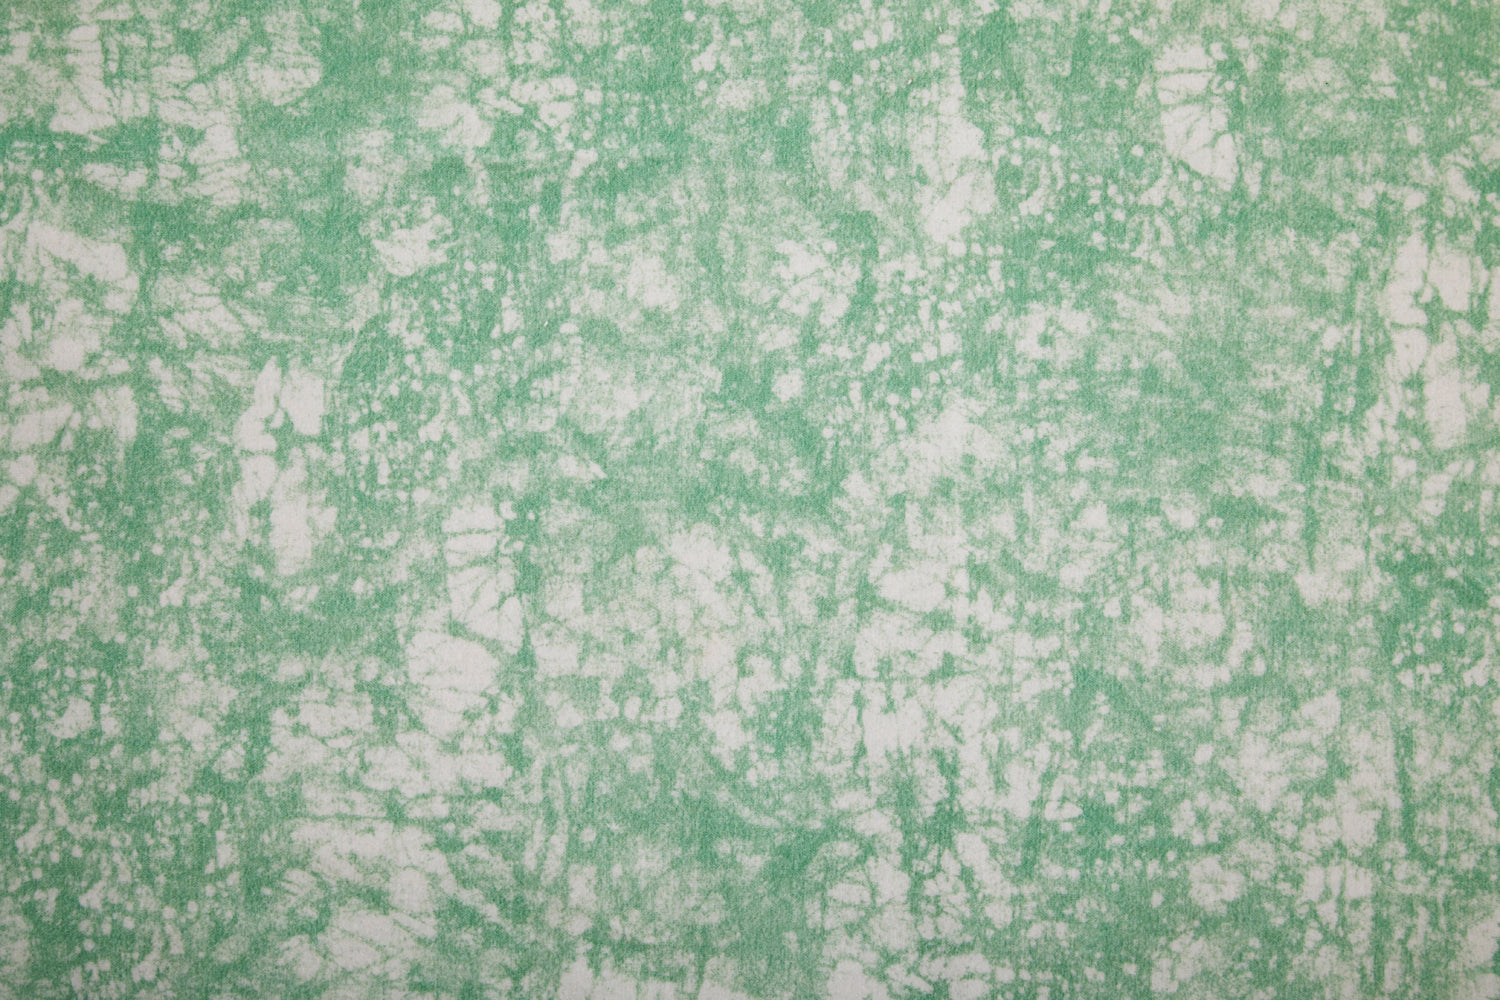 Detail of velvet fabric in an organic crumpled texture in light green on a cream field.